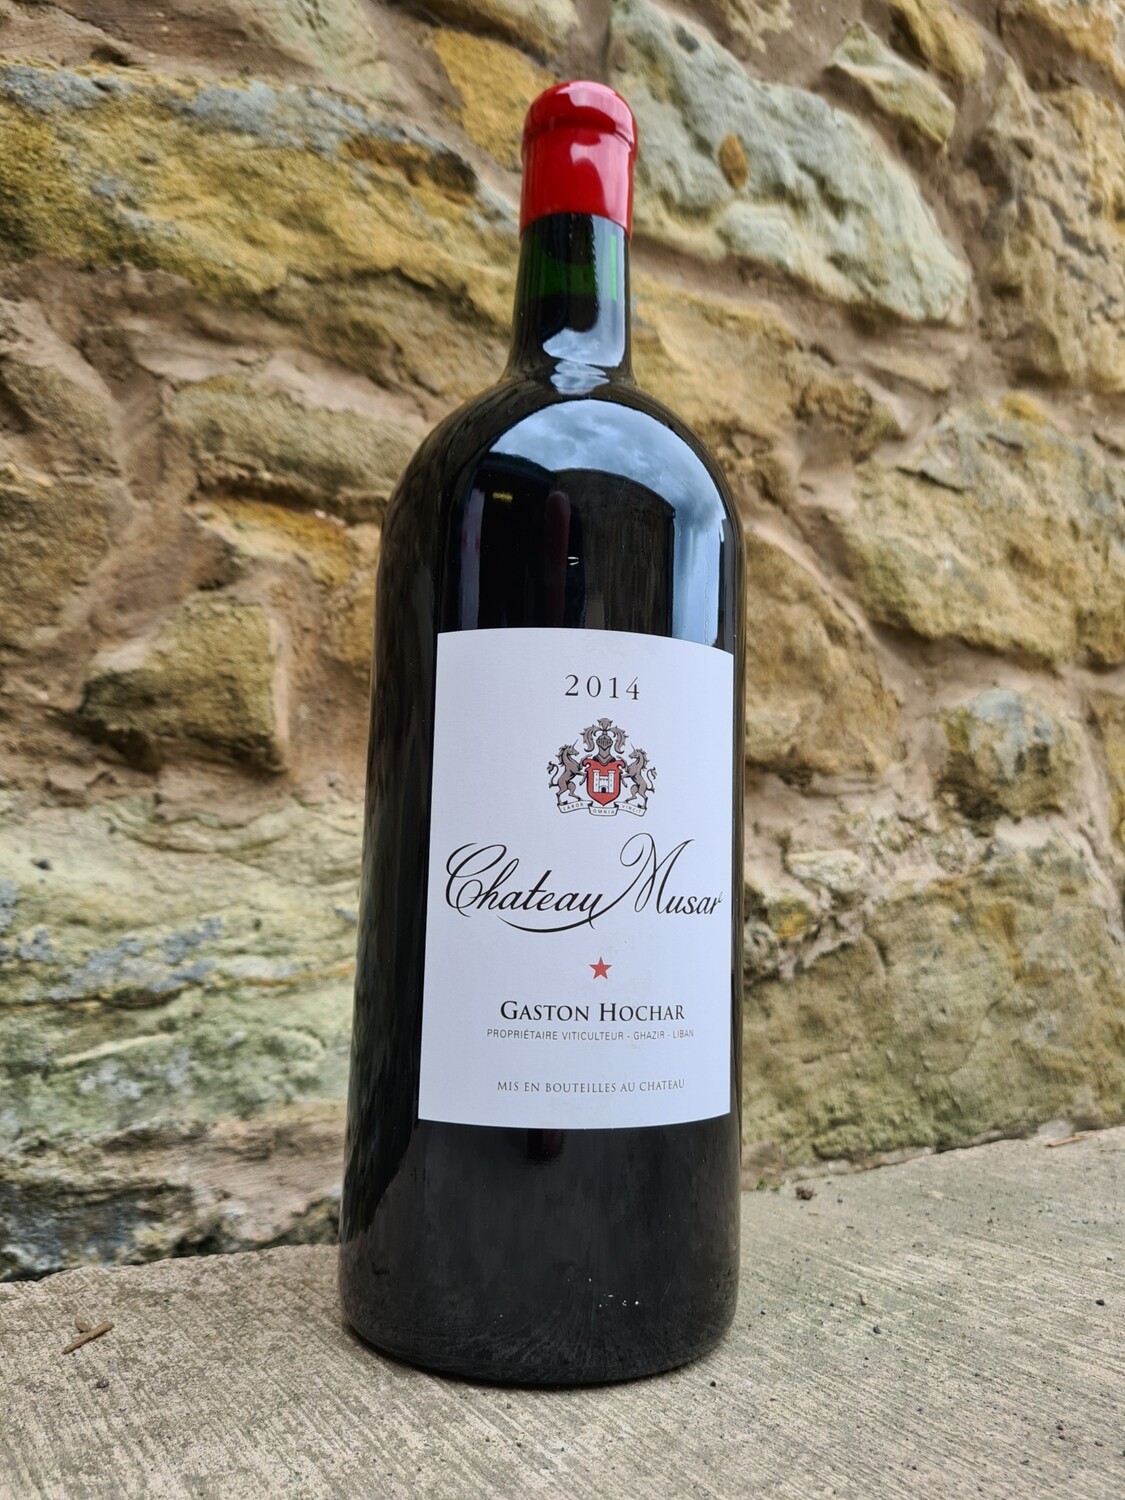 Chateau Musar 2016 Double Magnum